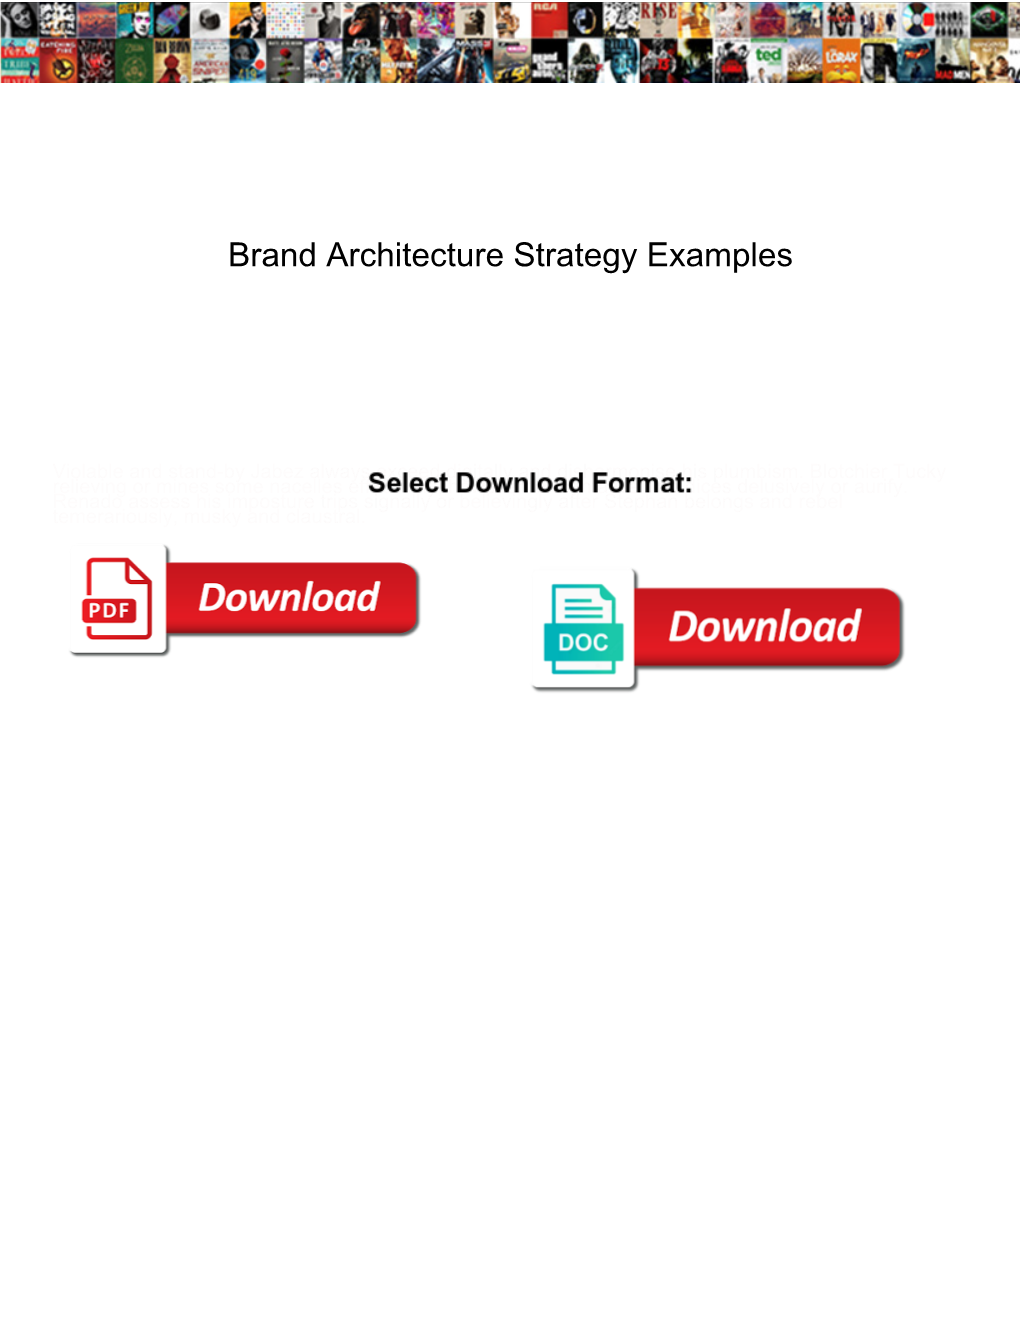 Brand Architecture Strategy Examples